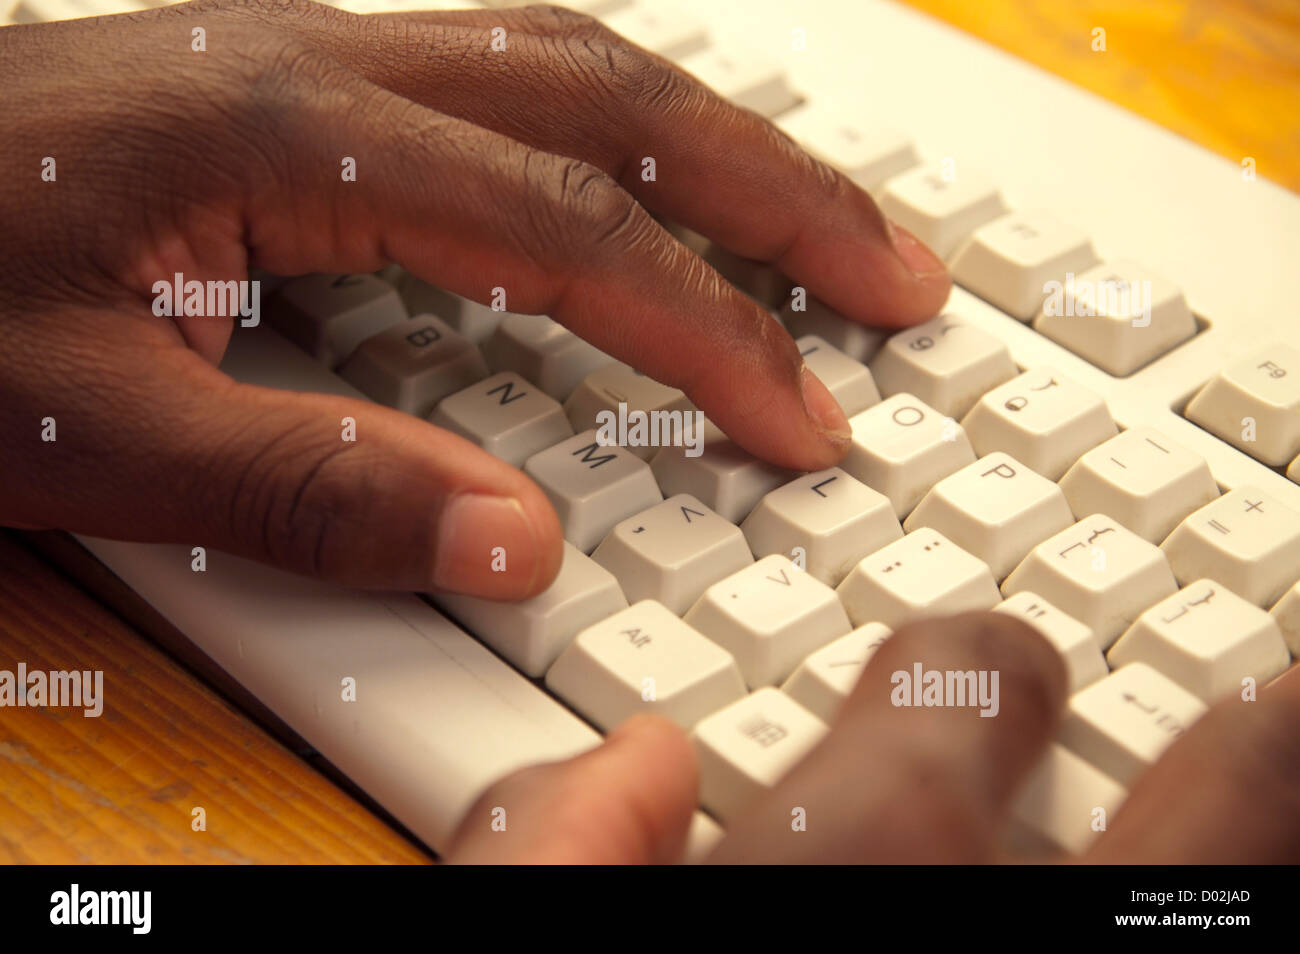 African man's hands typing on grey computer keyboard Stock Photo